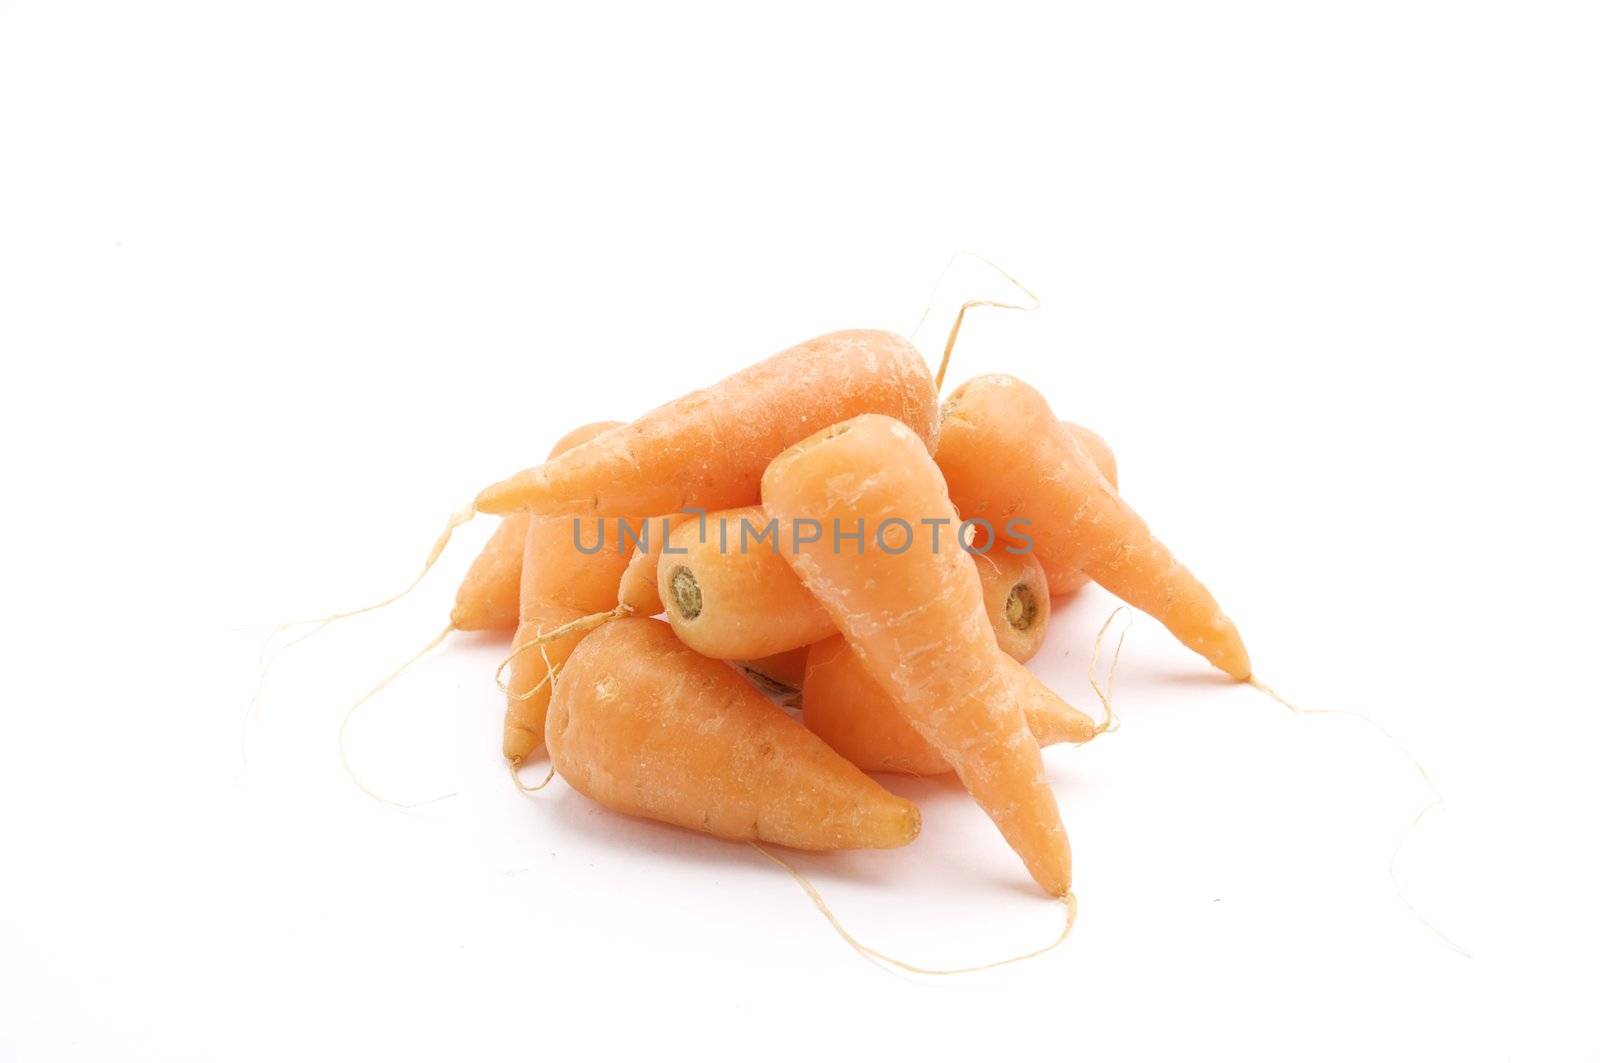 Fresh baby Carrots, isolated on a white background table, lit with a large light source from the above right.